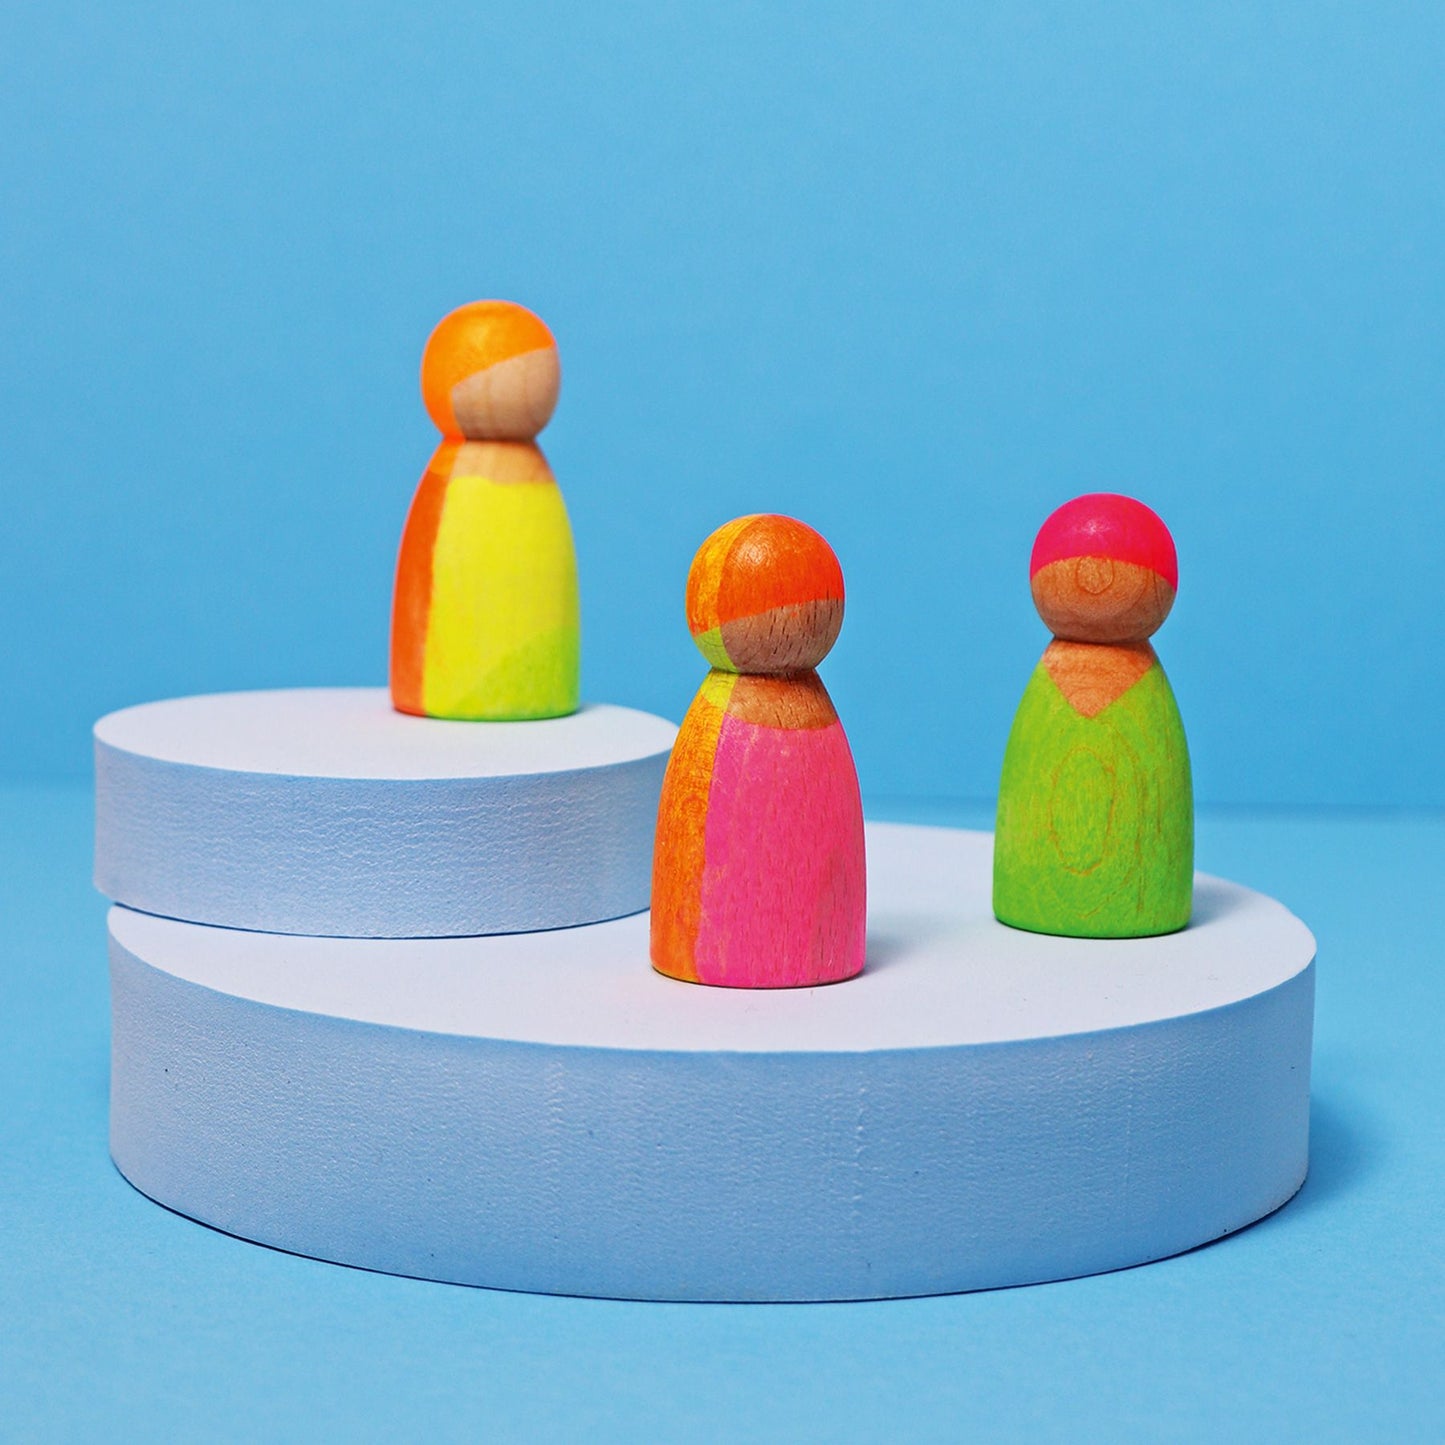 Mixed Neon Friends | 3 Wooden Toy Figures | Grimm's X Neon Collection